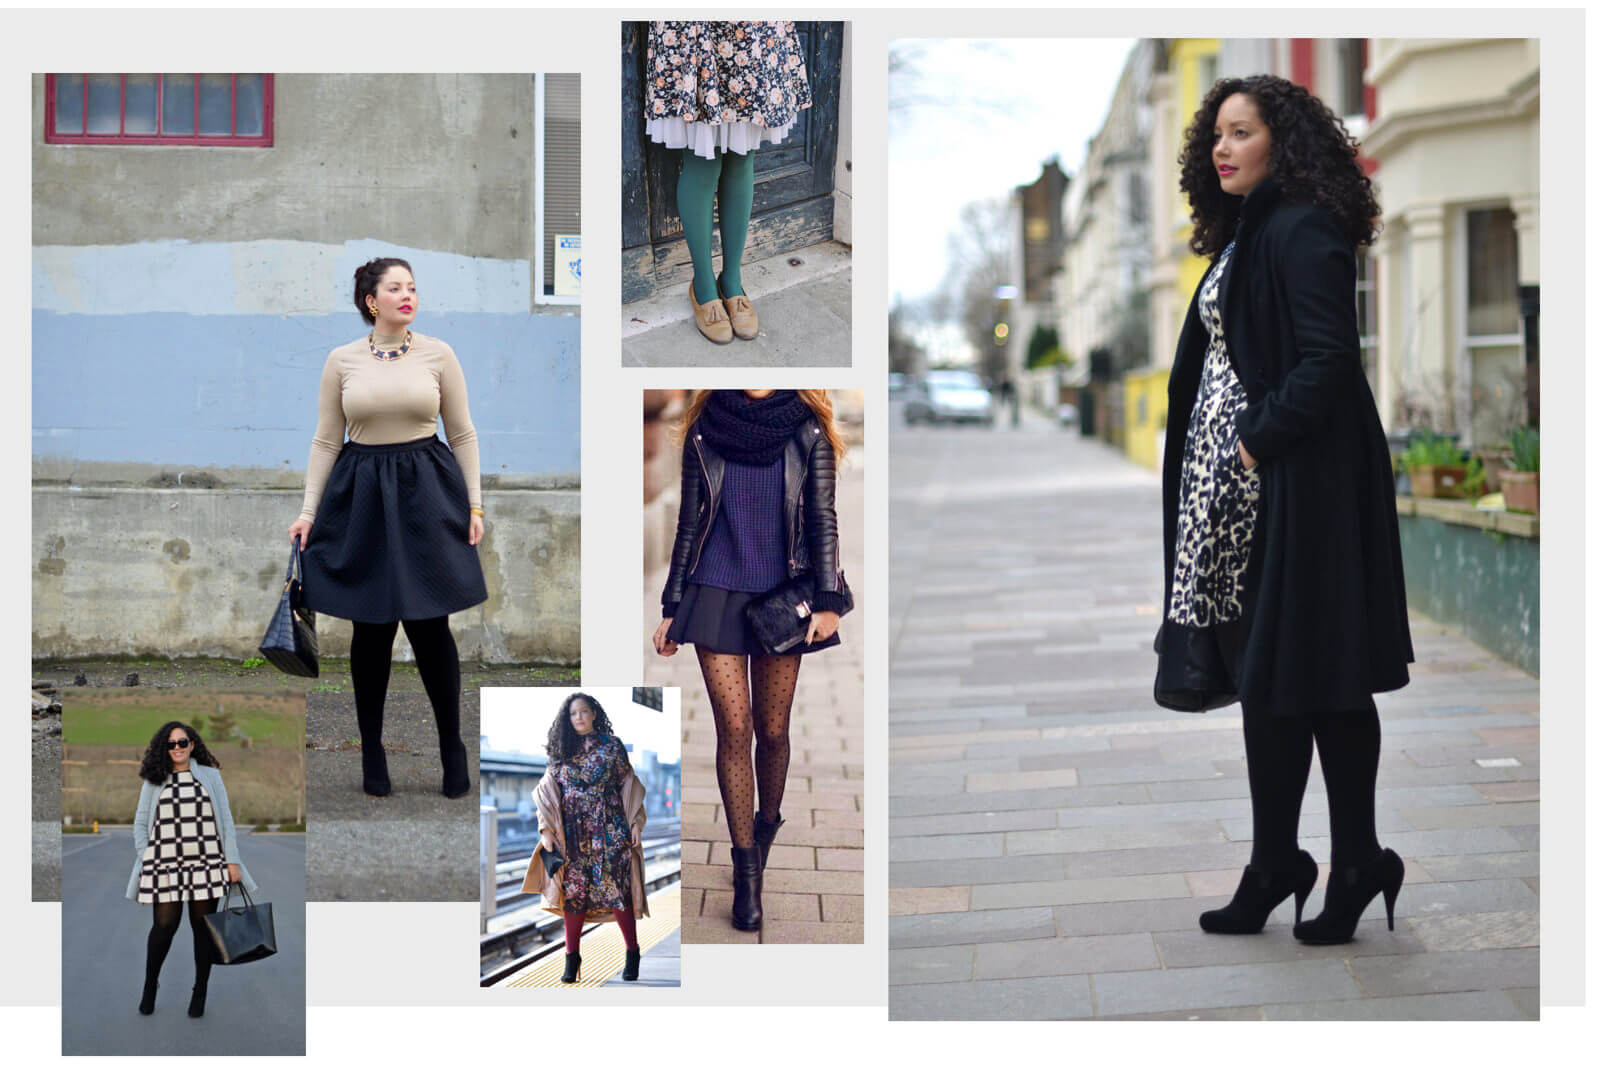 3 Types of Stylish Tights to Wear This Winter Via @GirlWithCurves #fashion #style #outfits #tights #winter 1